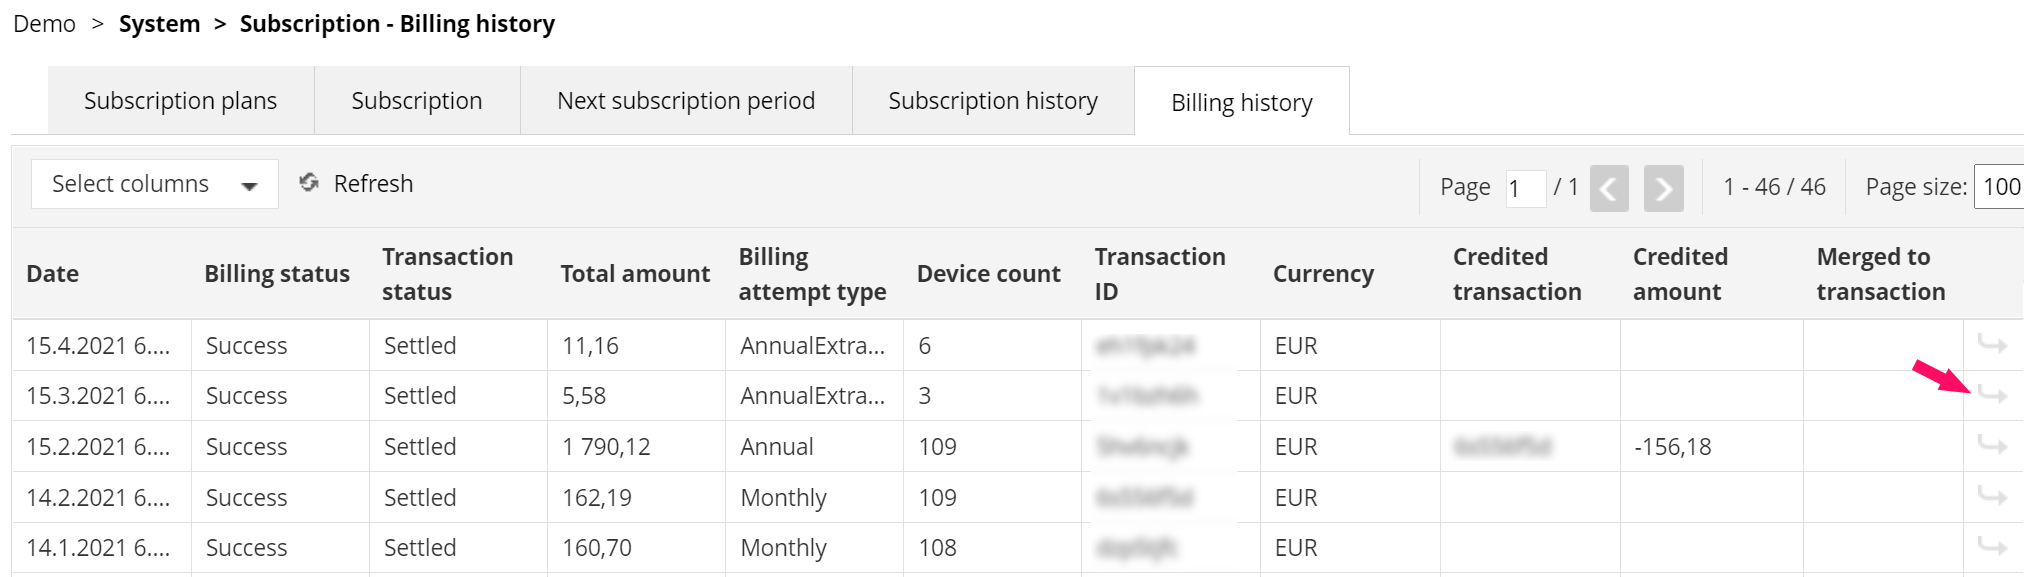 Billing history invoices